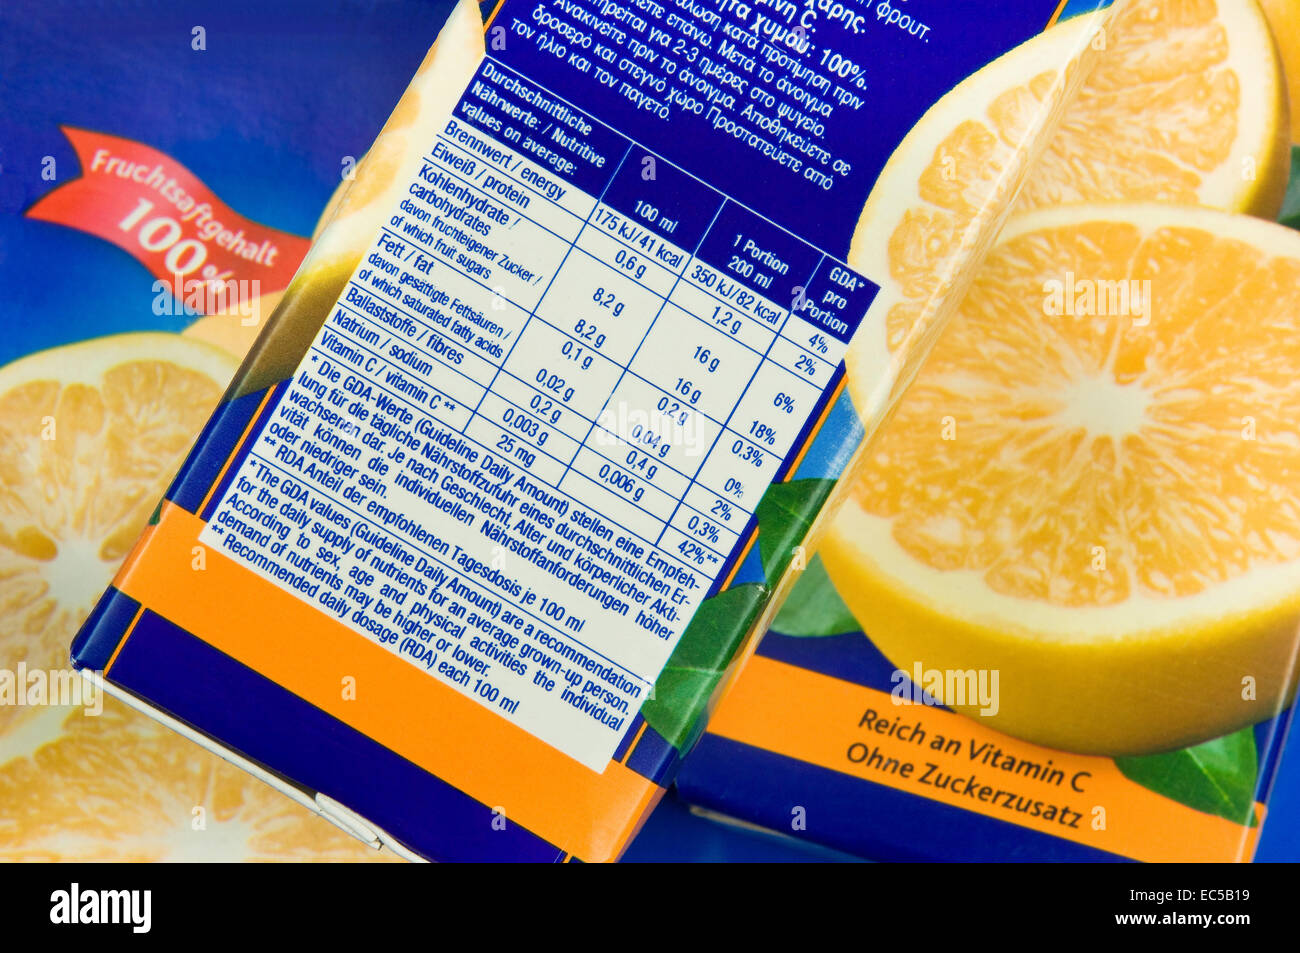 Nutrition information on a carton of juice drinks Stock Photo